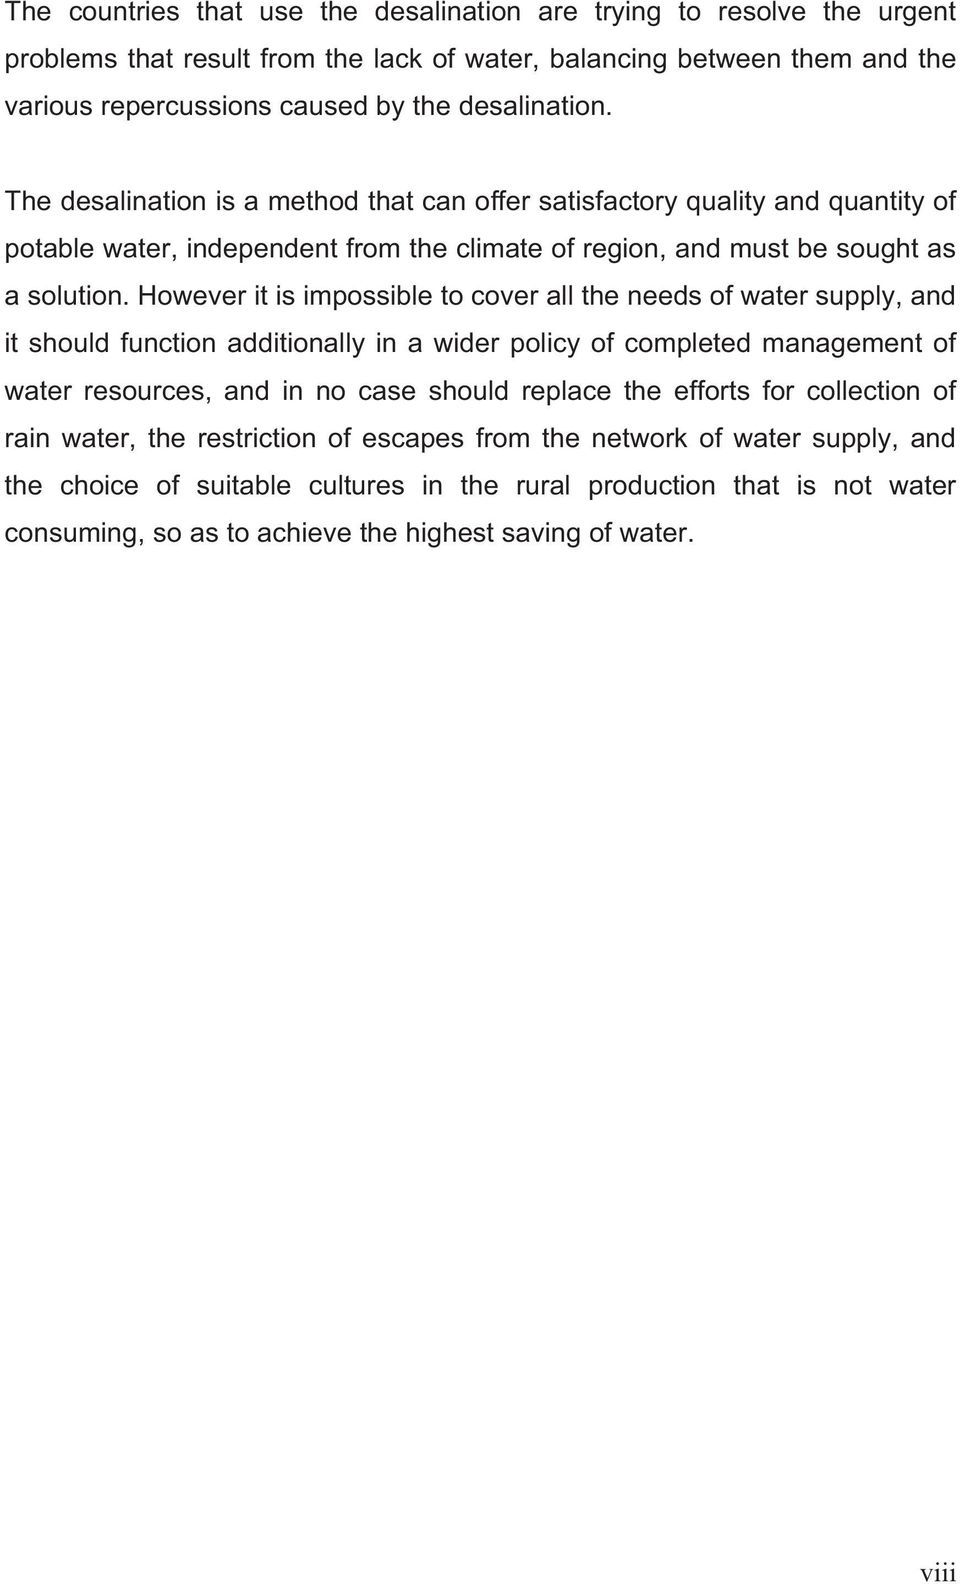 However it is impossible to cover all the needs of water supply, and it should function additionally in a wider policy of completed management of water resources, and in no case should replace the